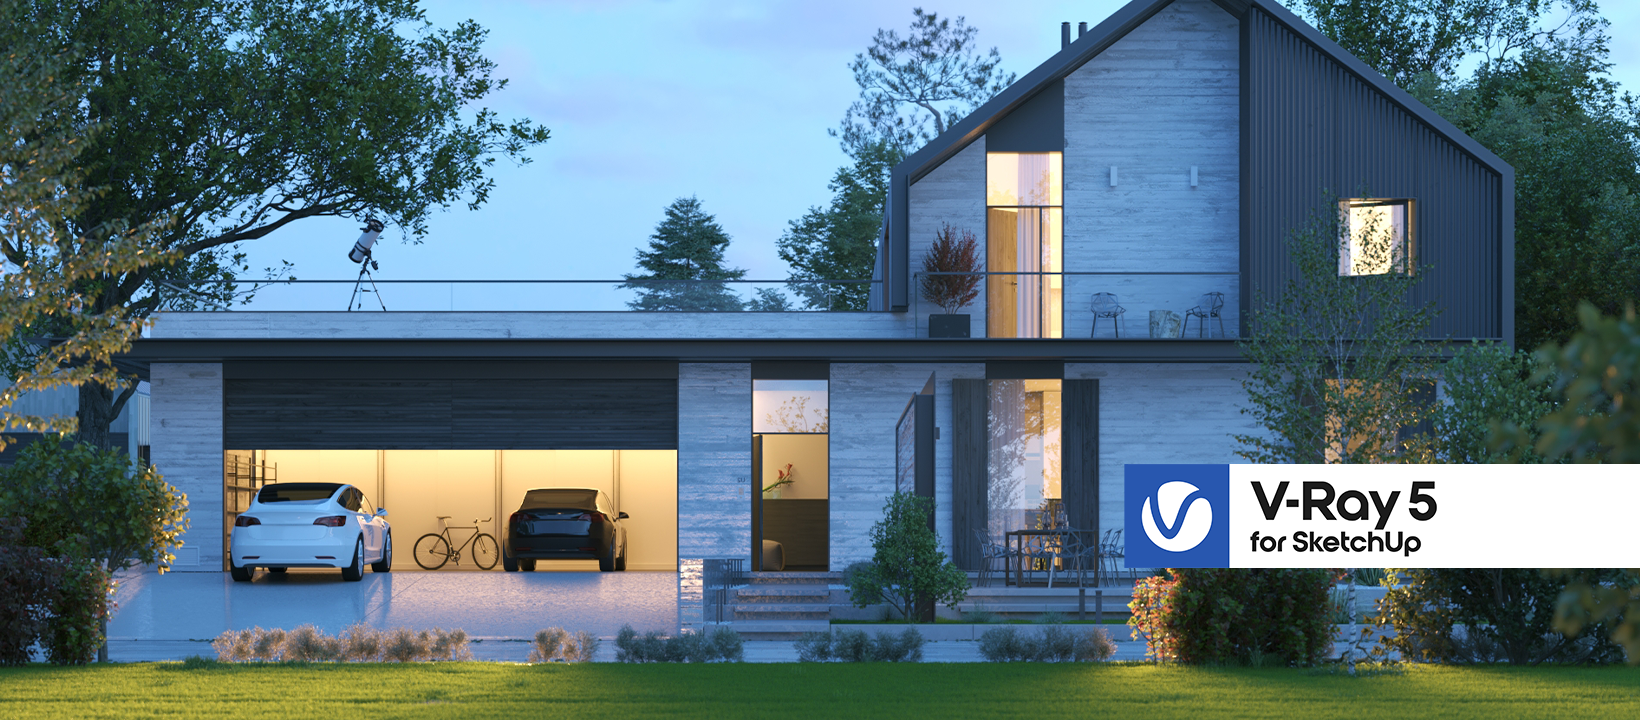 V-Ray 5 for SketchUp Update 2: Discover The New Features